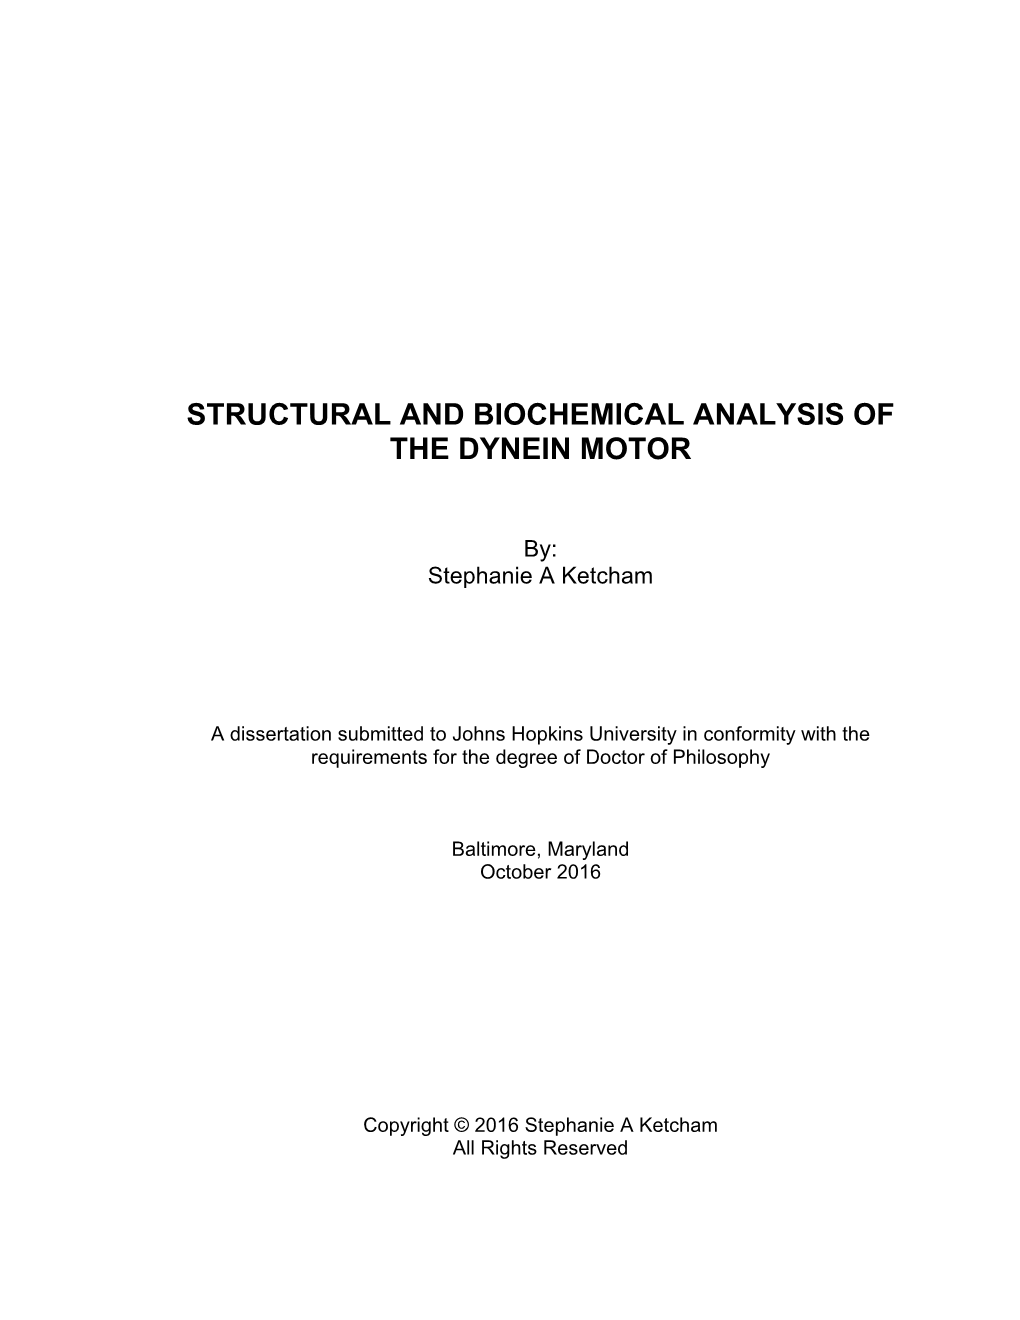 Structural and Biochemical Analysis of the Dynein Motor